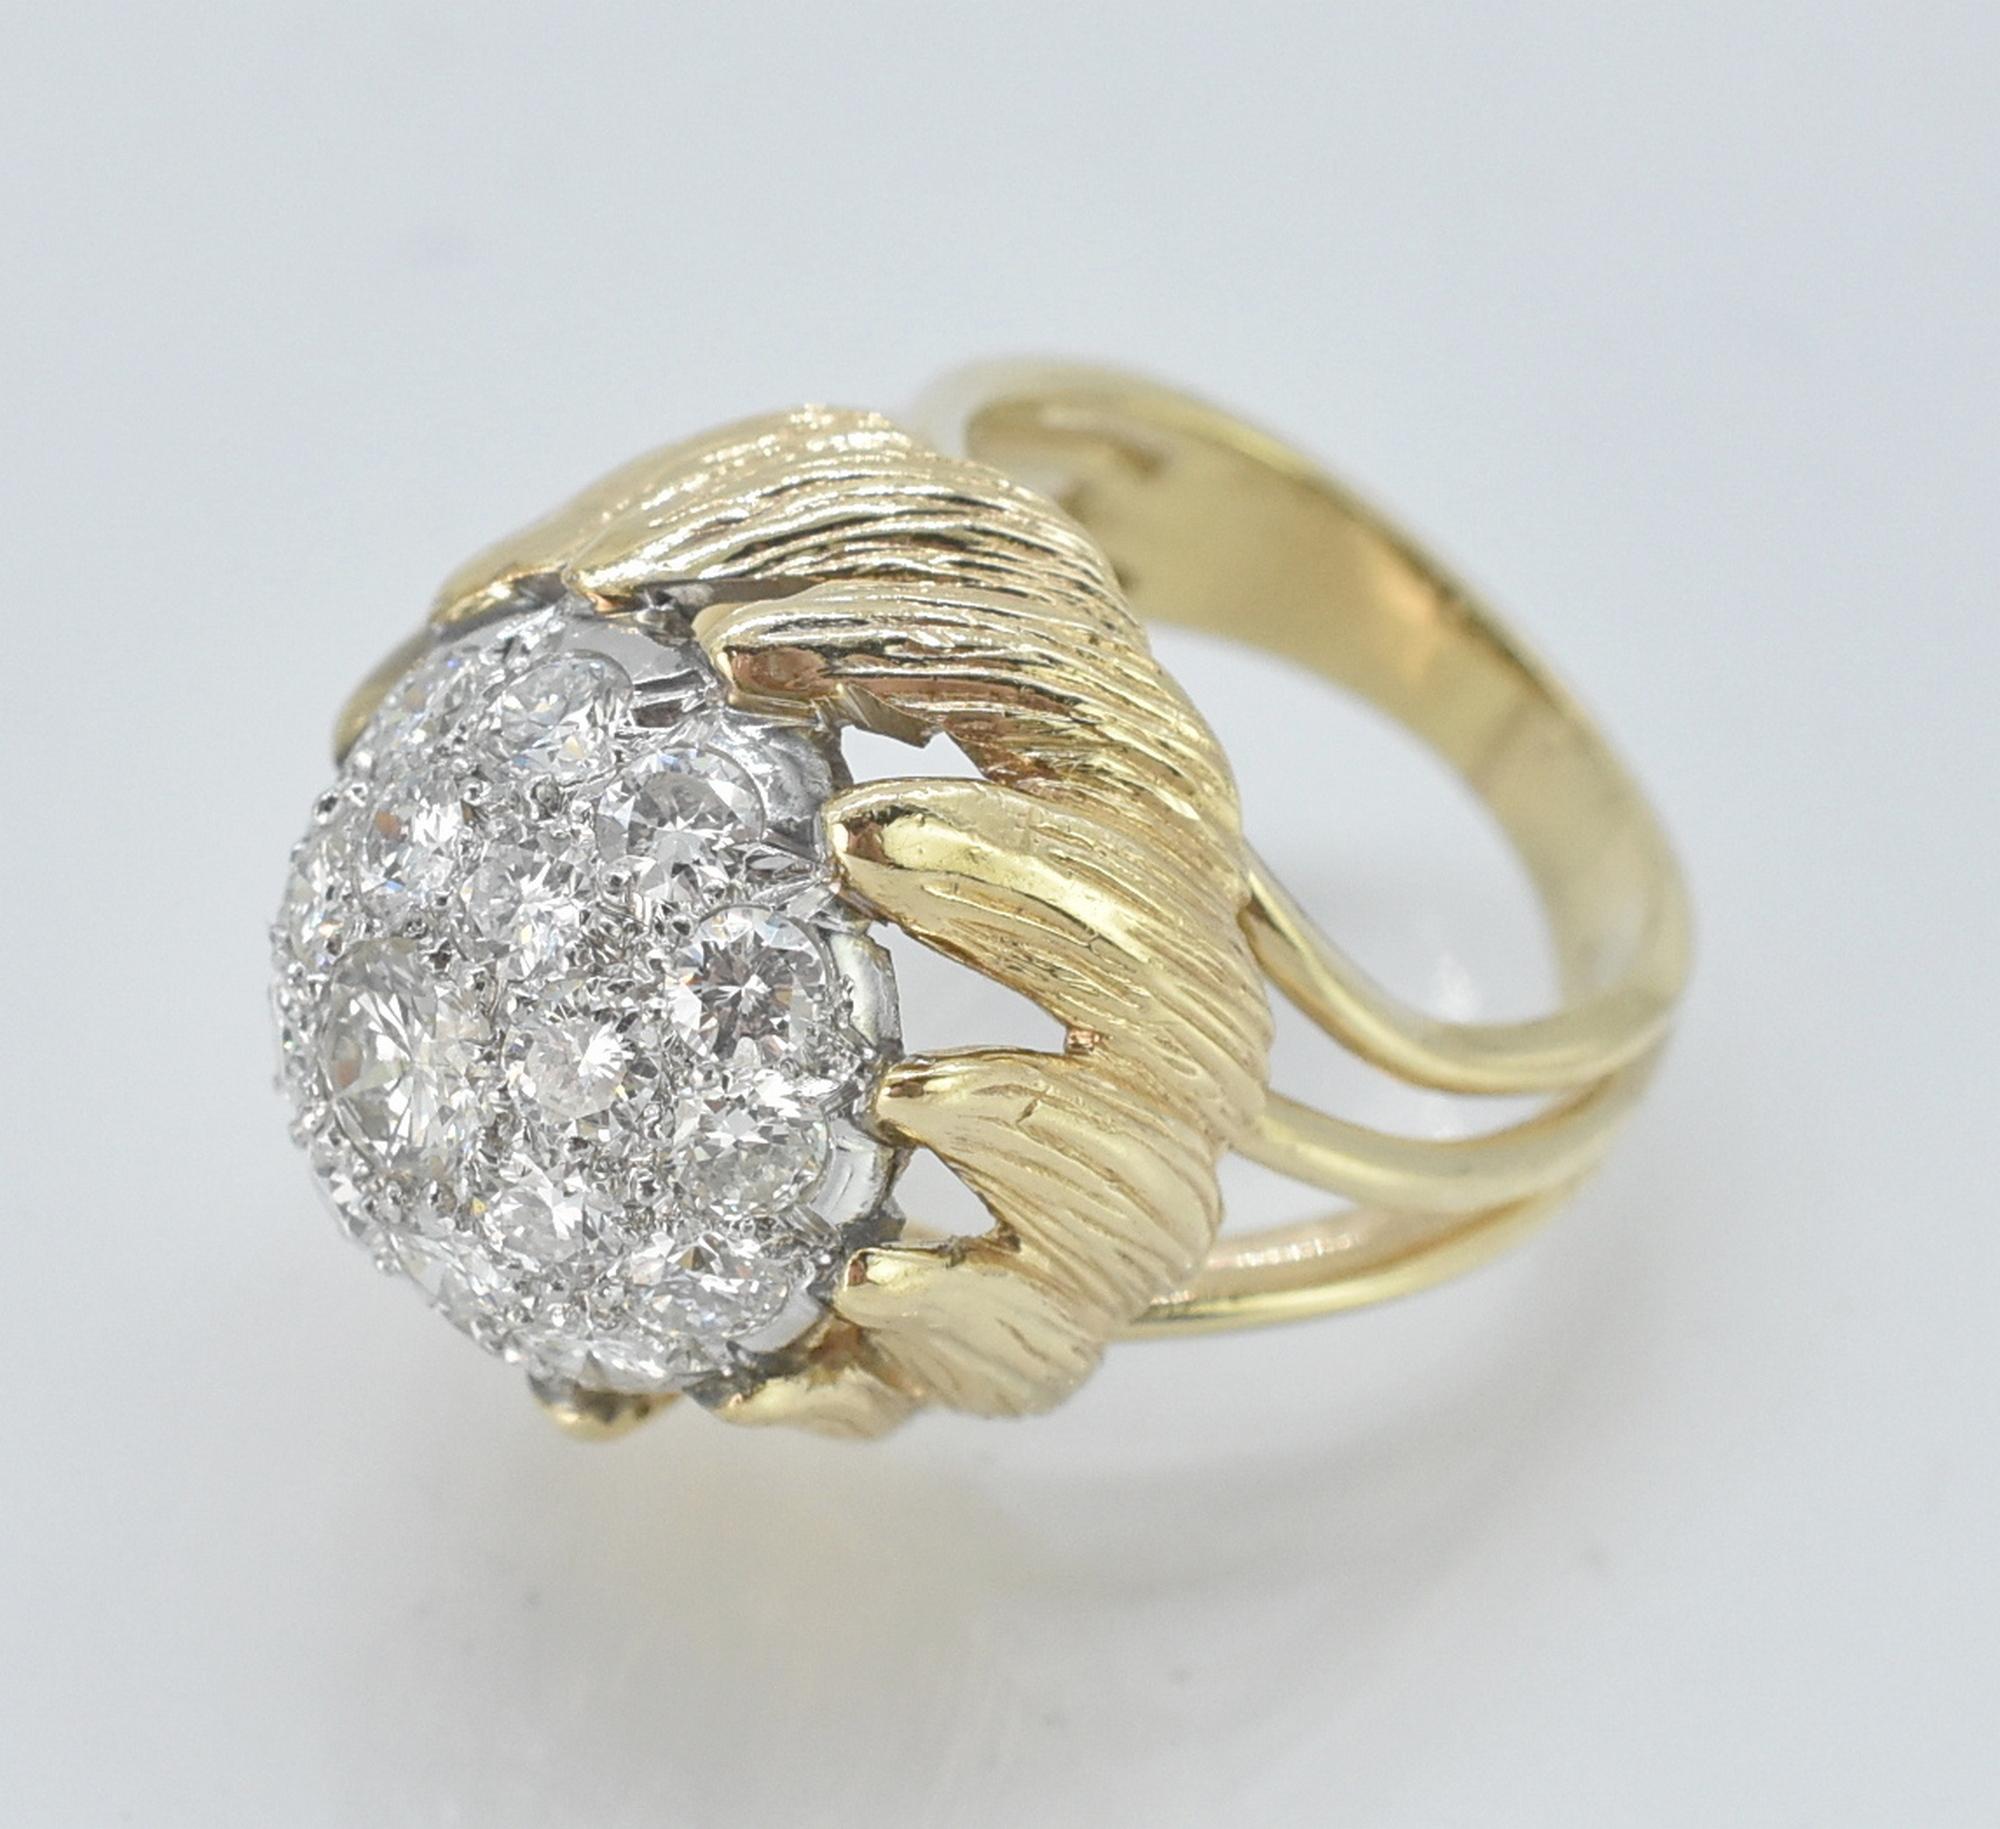 14K diamond cluster ring, 2.0 CTTW. 14K yellow gold and diamond cluster ring. .75 ct center stone, with 2.0 cttw VS-SI. Large setting with wave design on gold setting, diamond cluster dome. Dome is 5/8